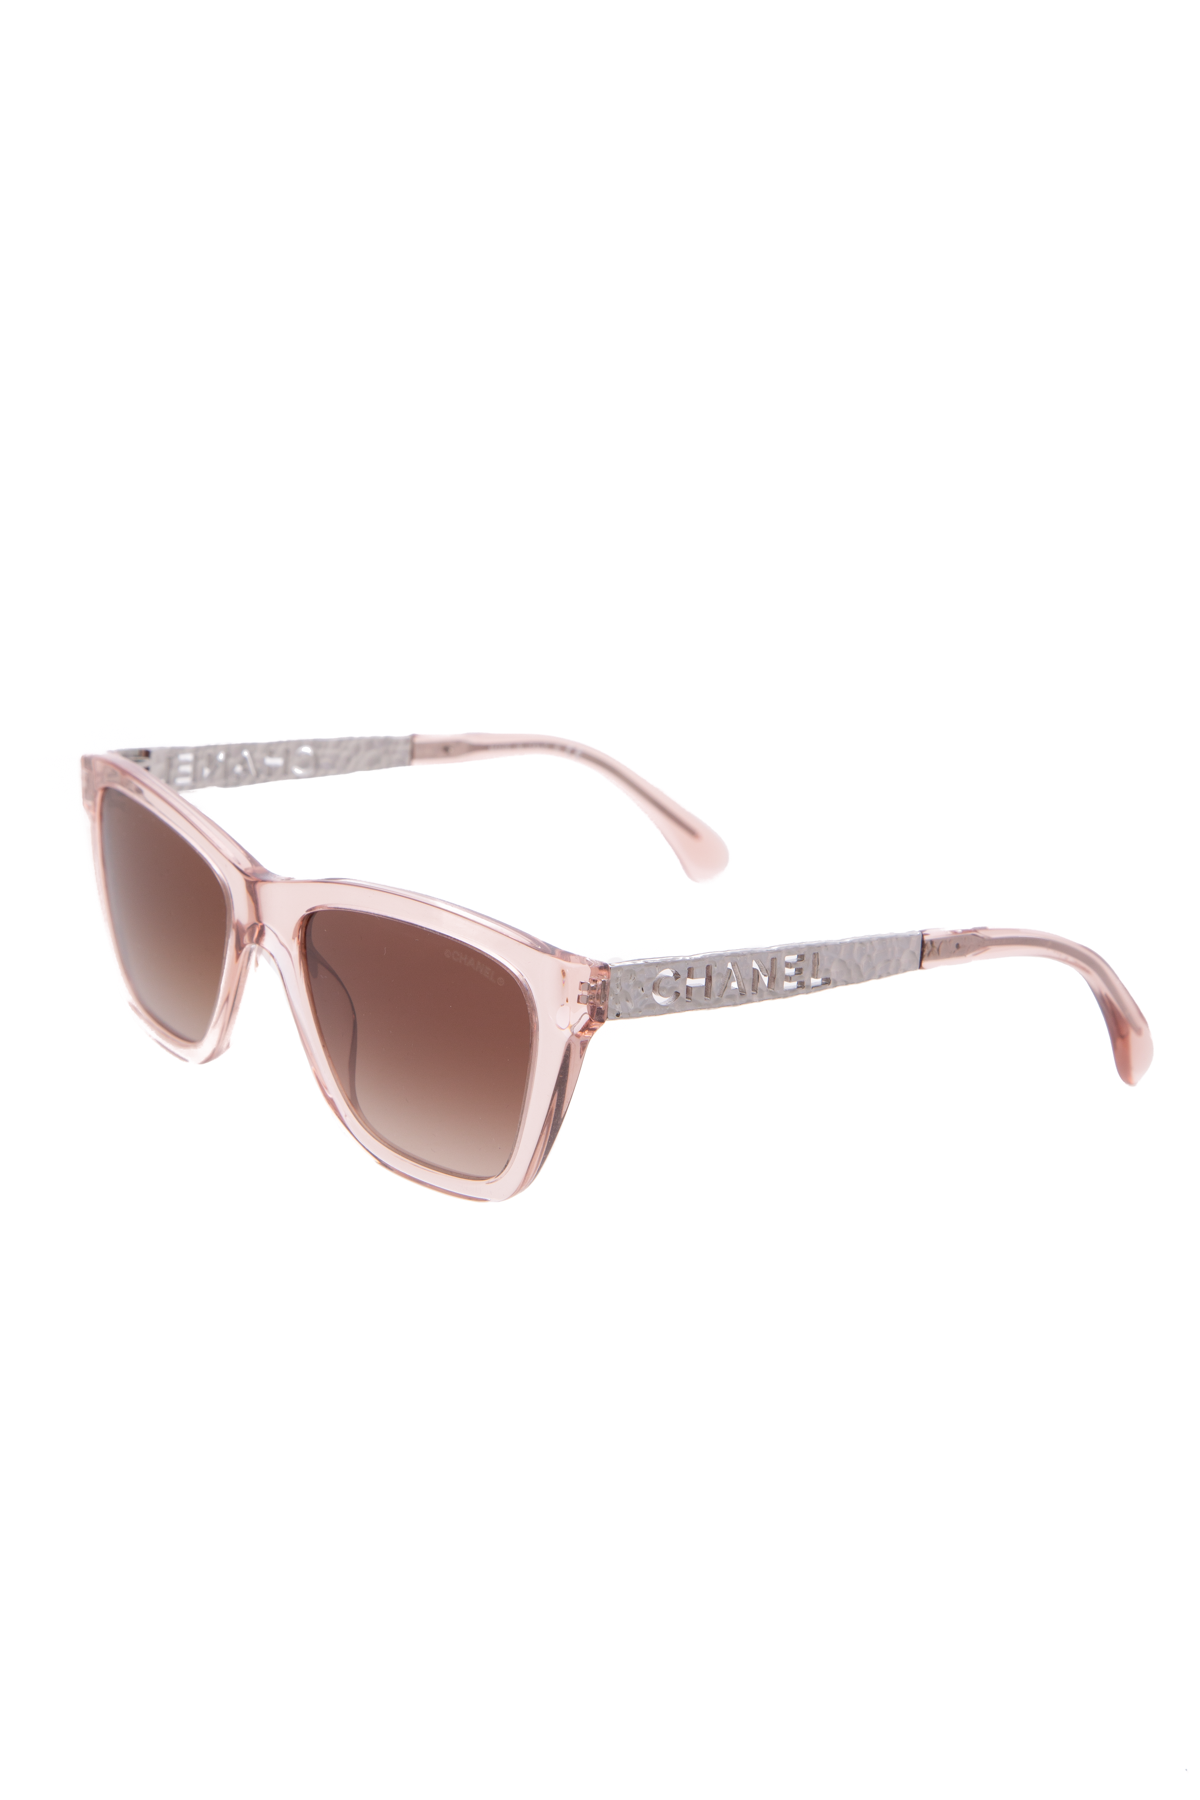 CHANEL Gold Gray Sunglasses for Women for sale